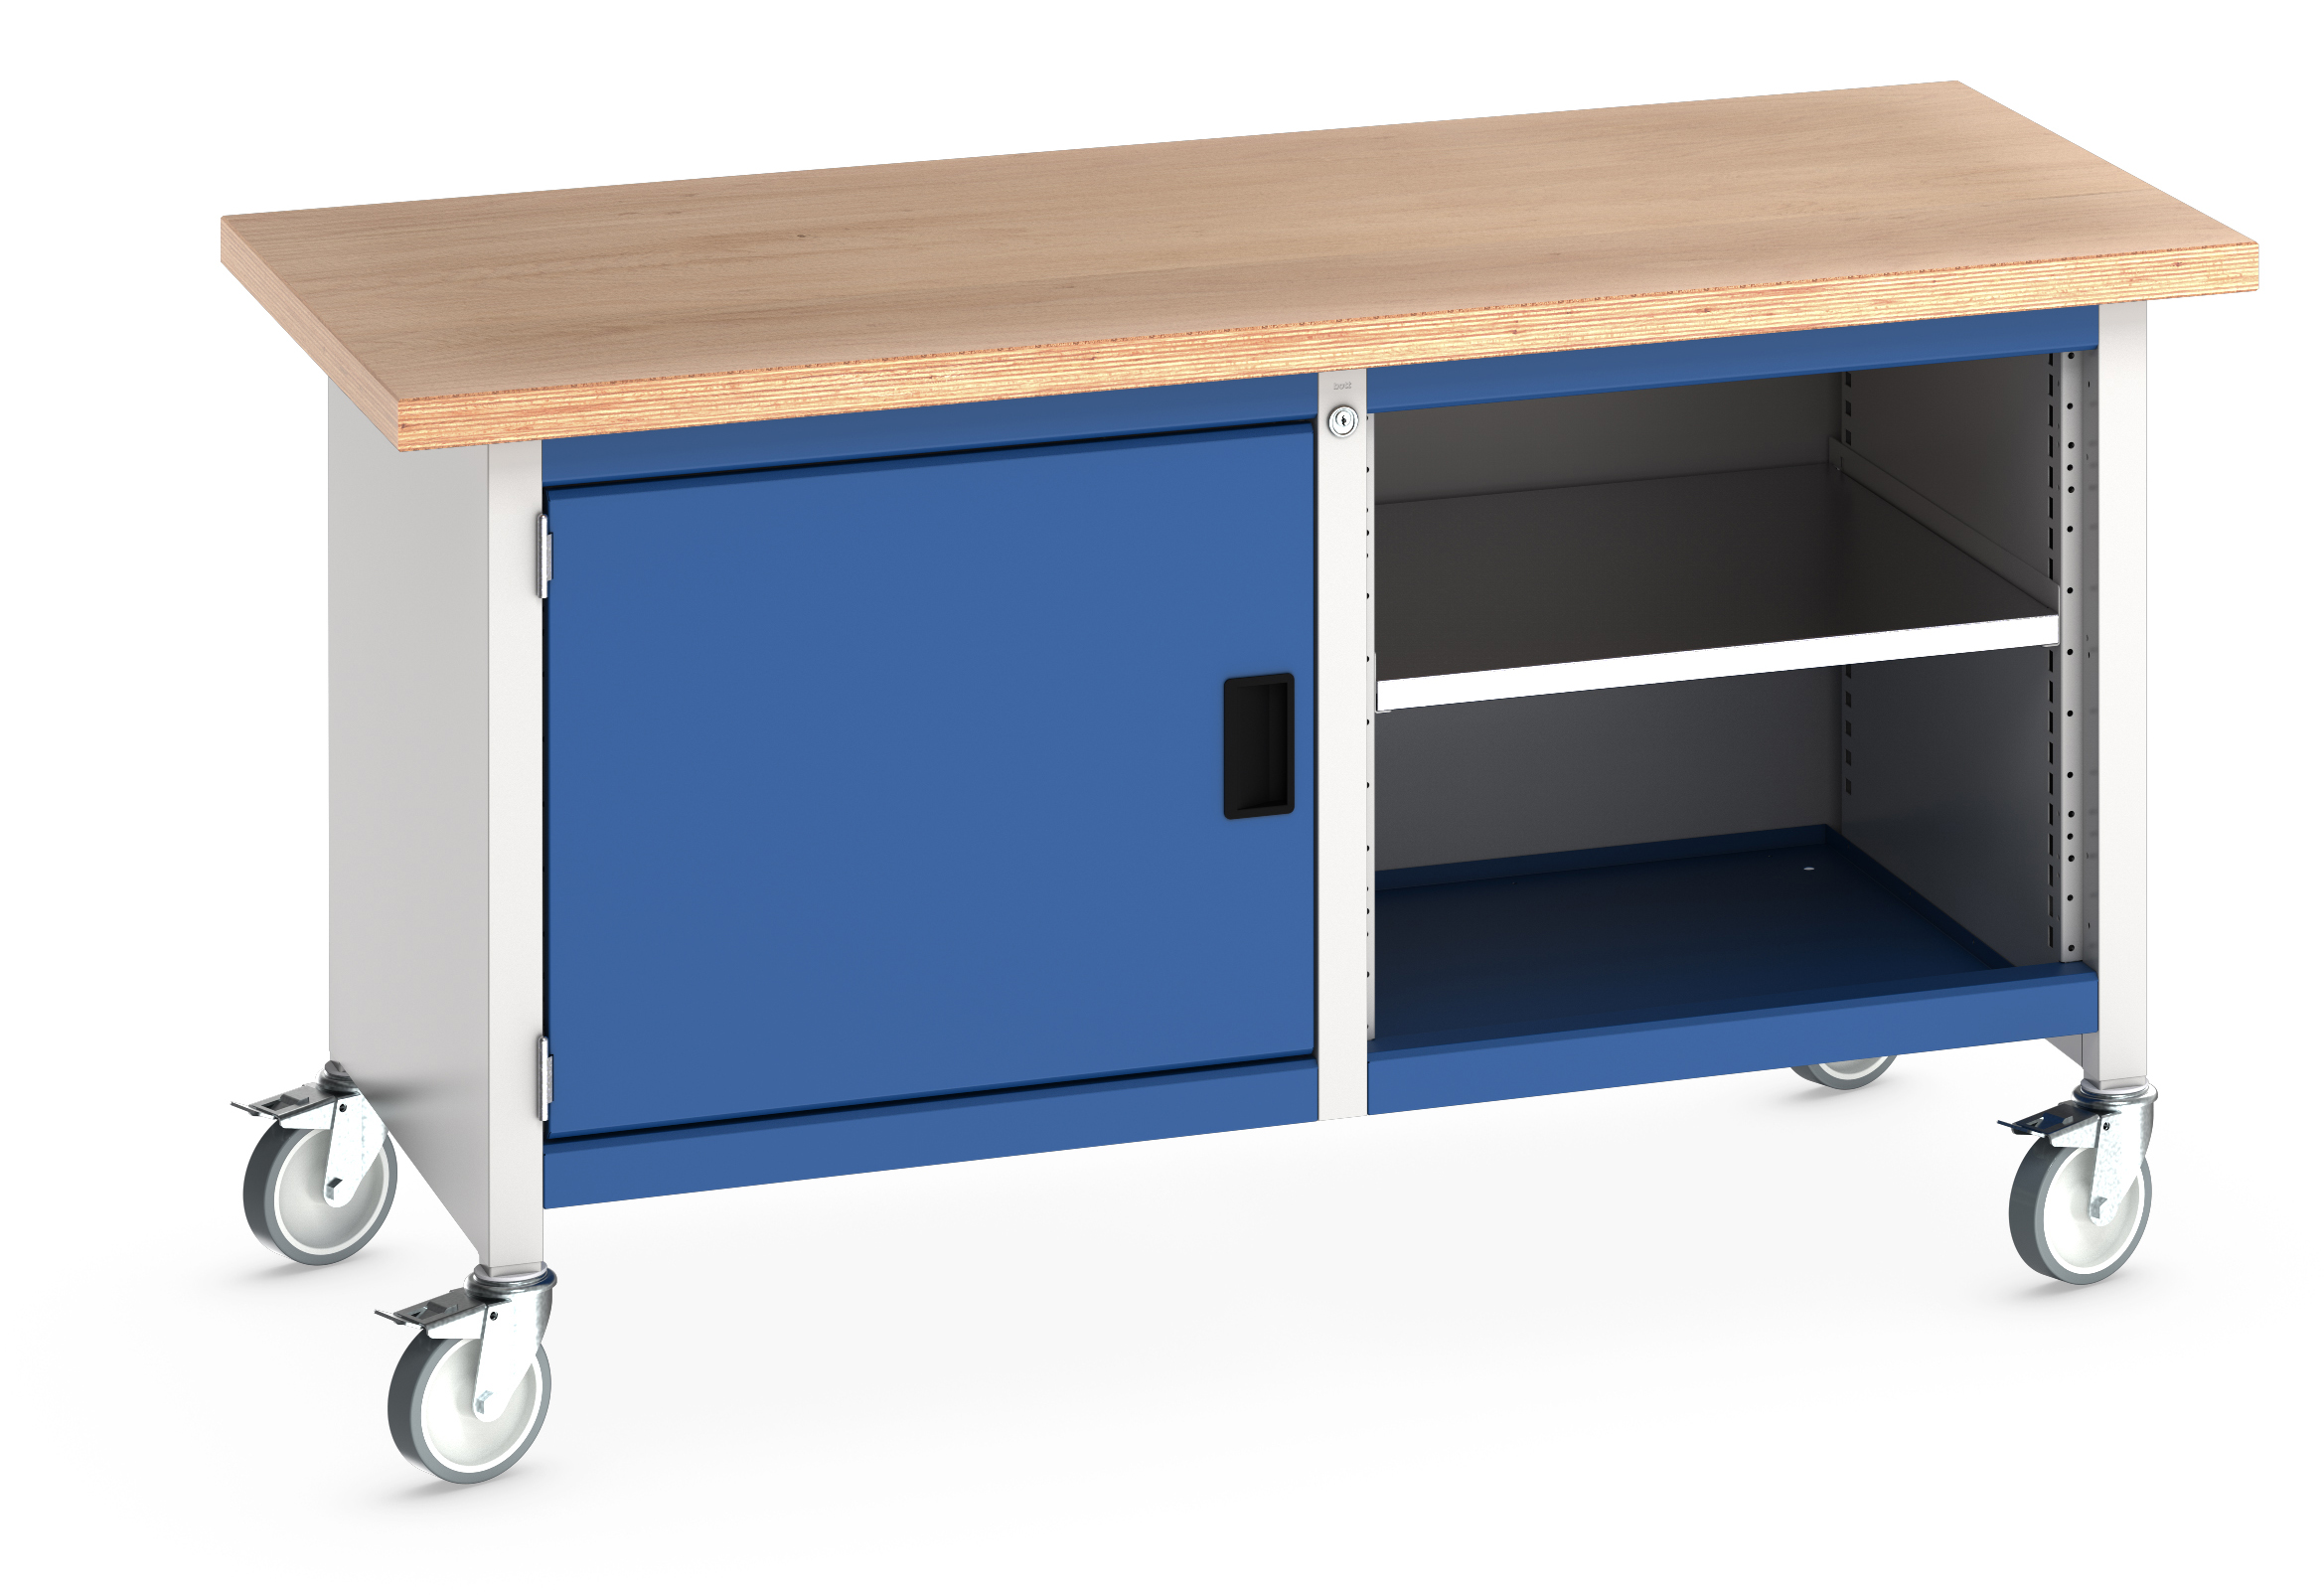 Bott Cubio Mobile Storage Bench With Full Cupboard / Open Cupboard - 41002094.11V